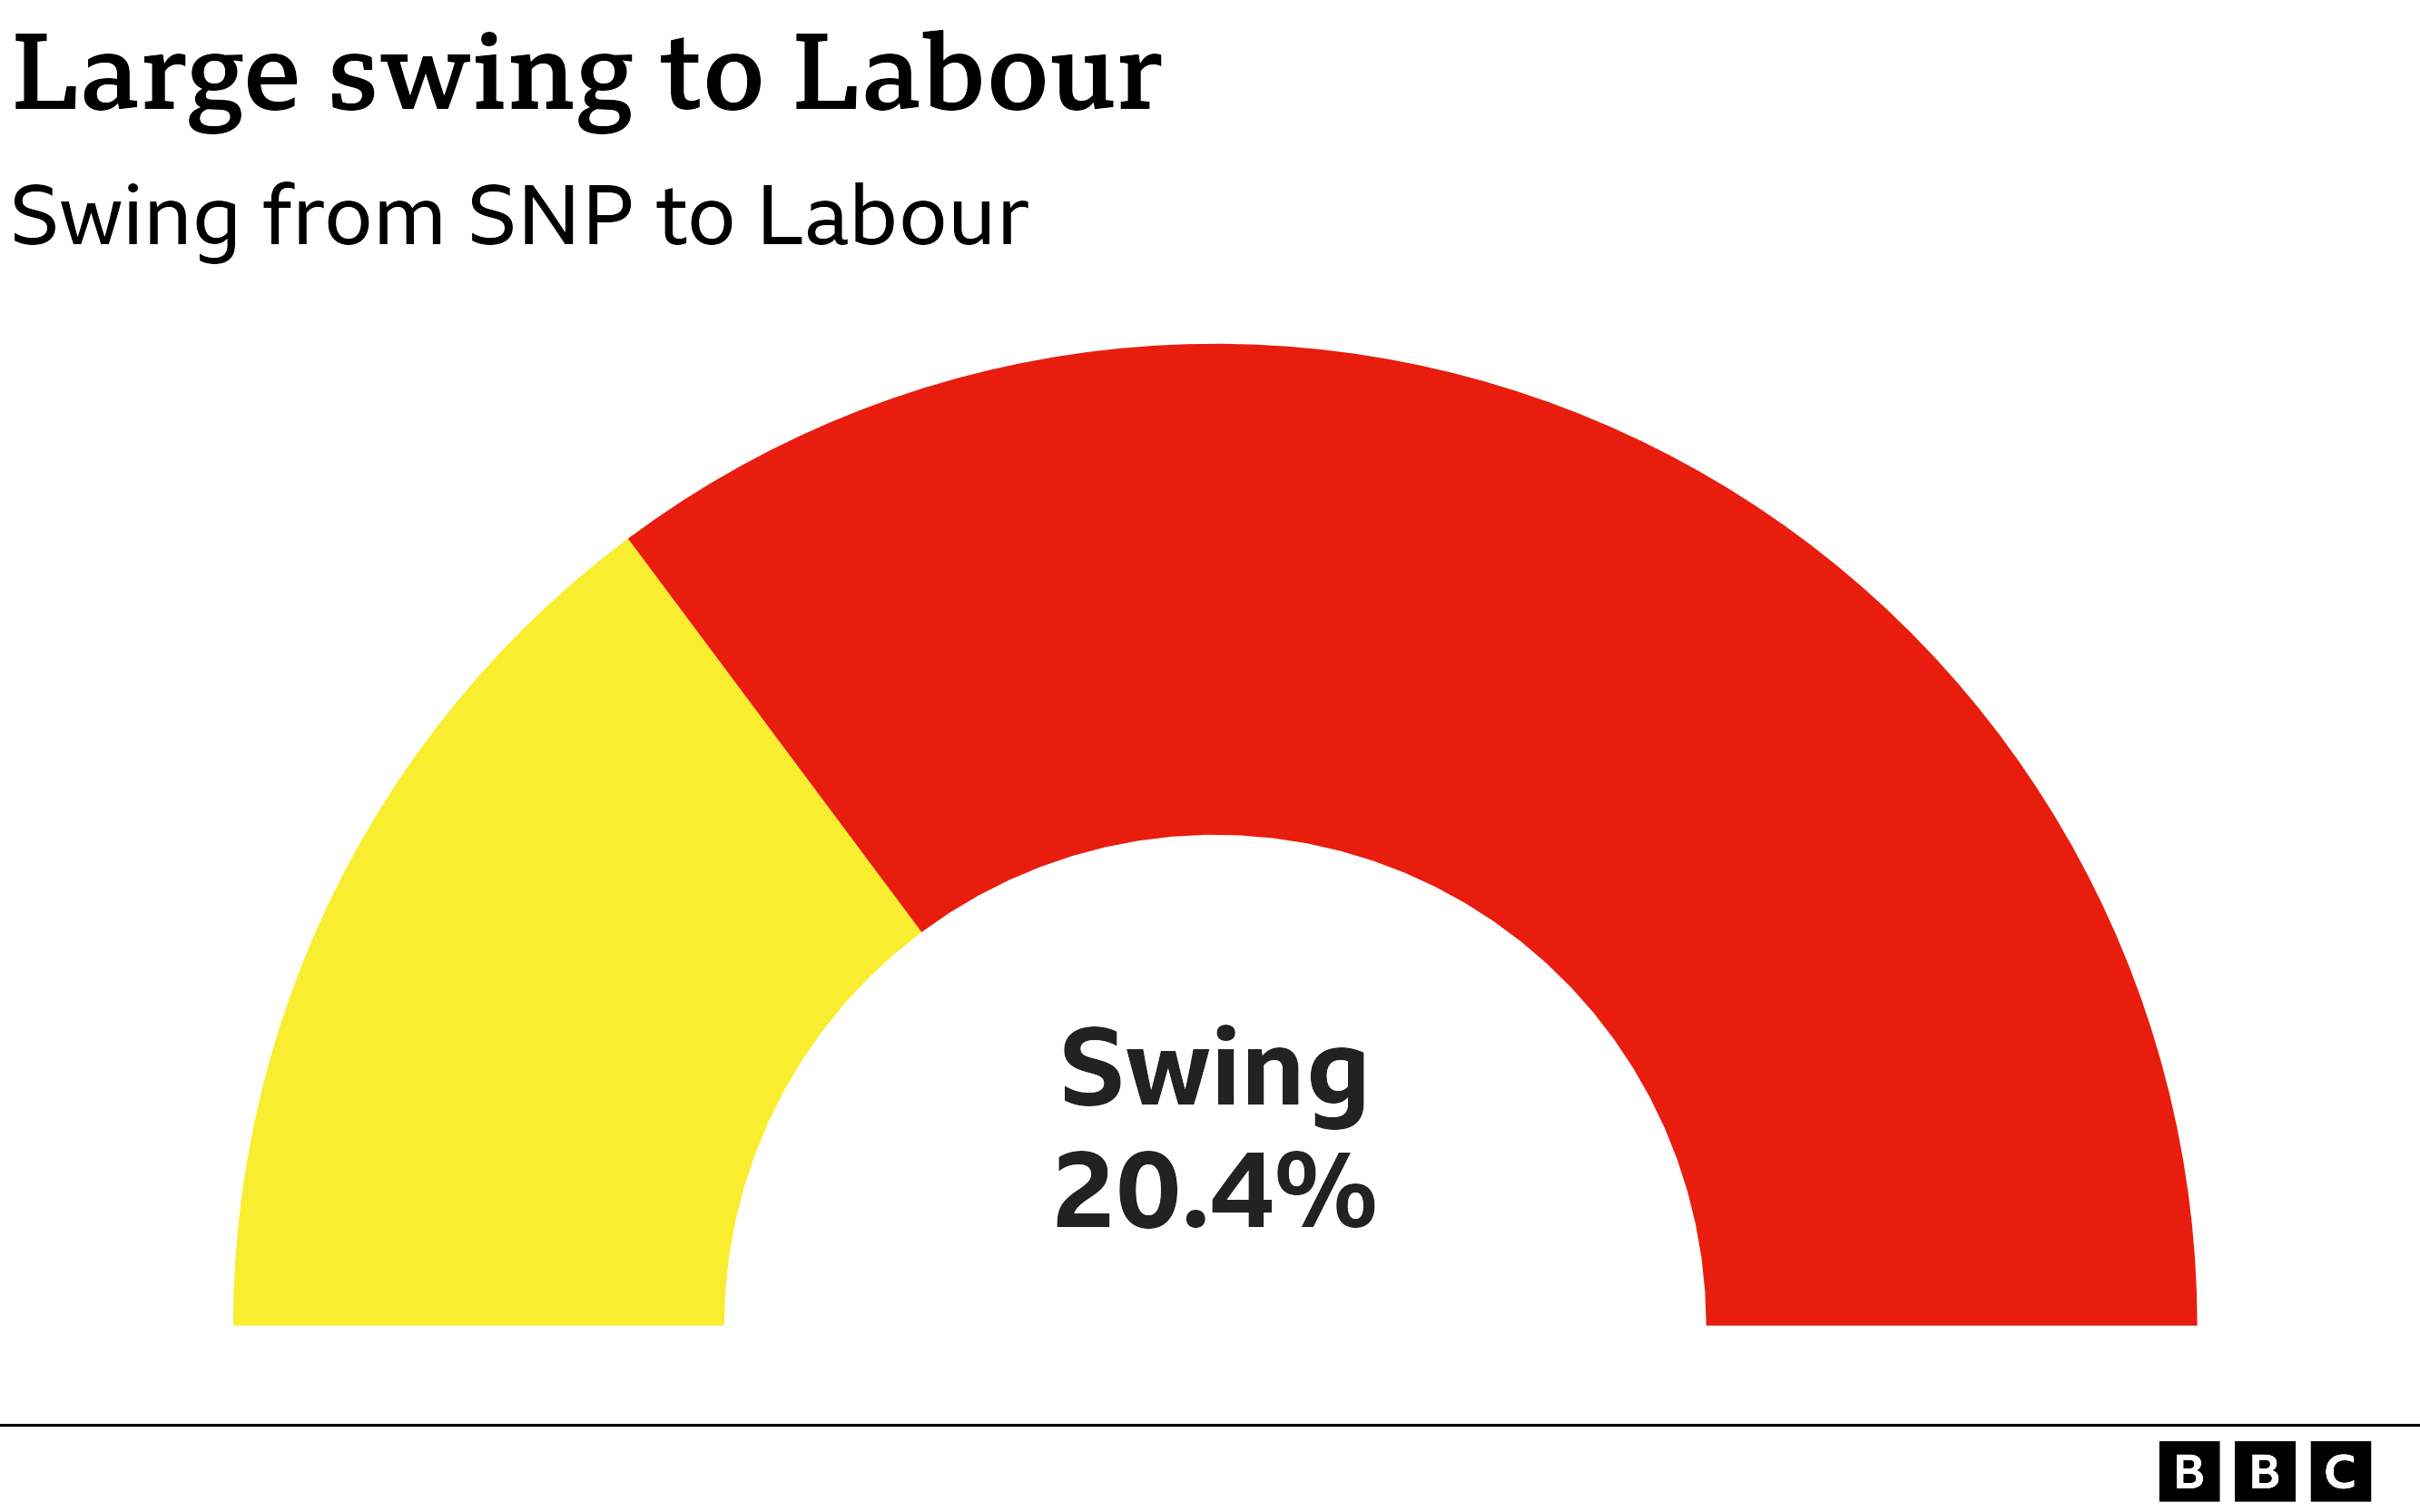 swing from SNP to Labour